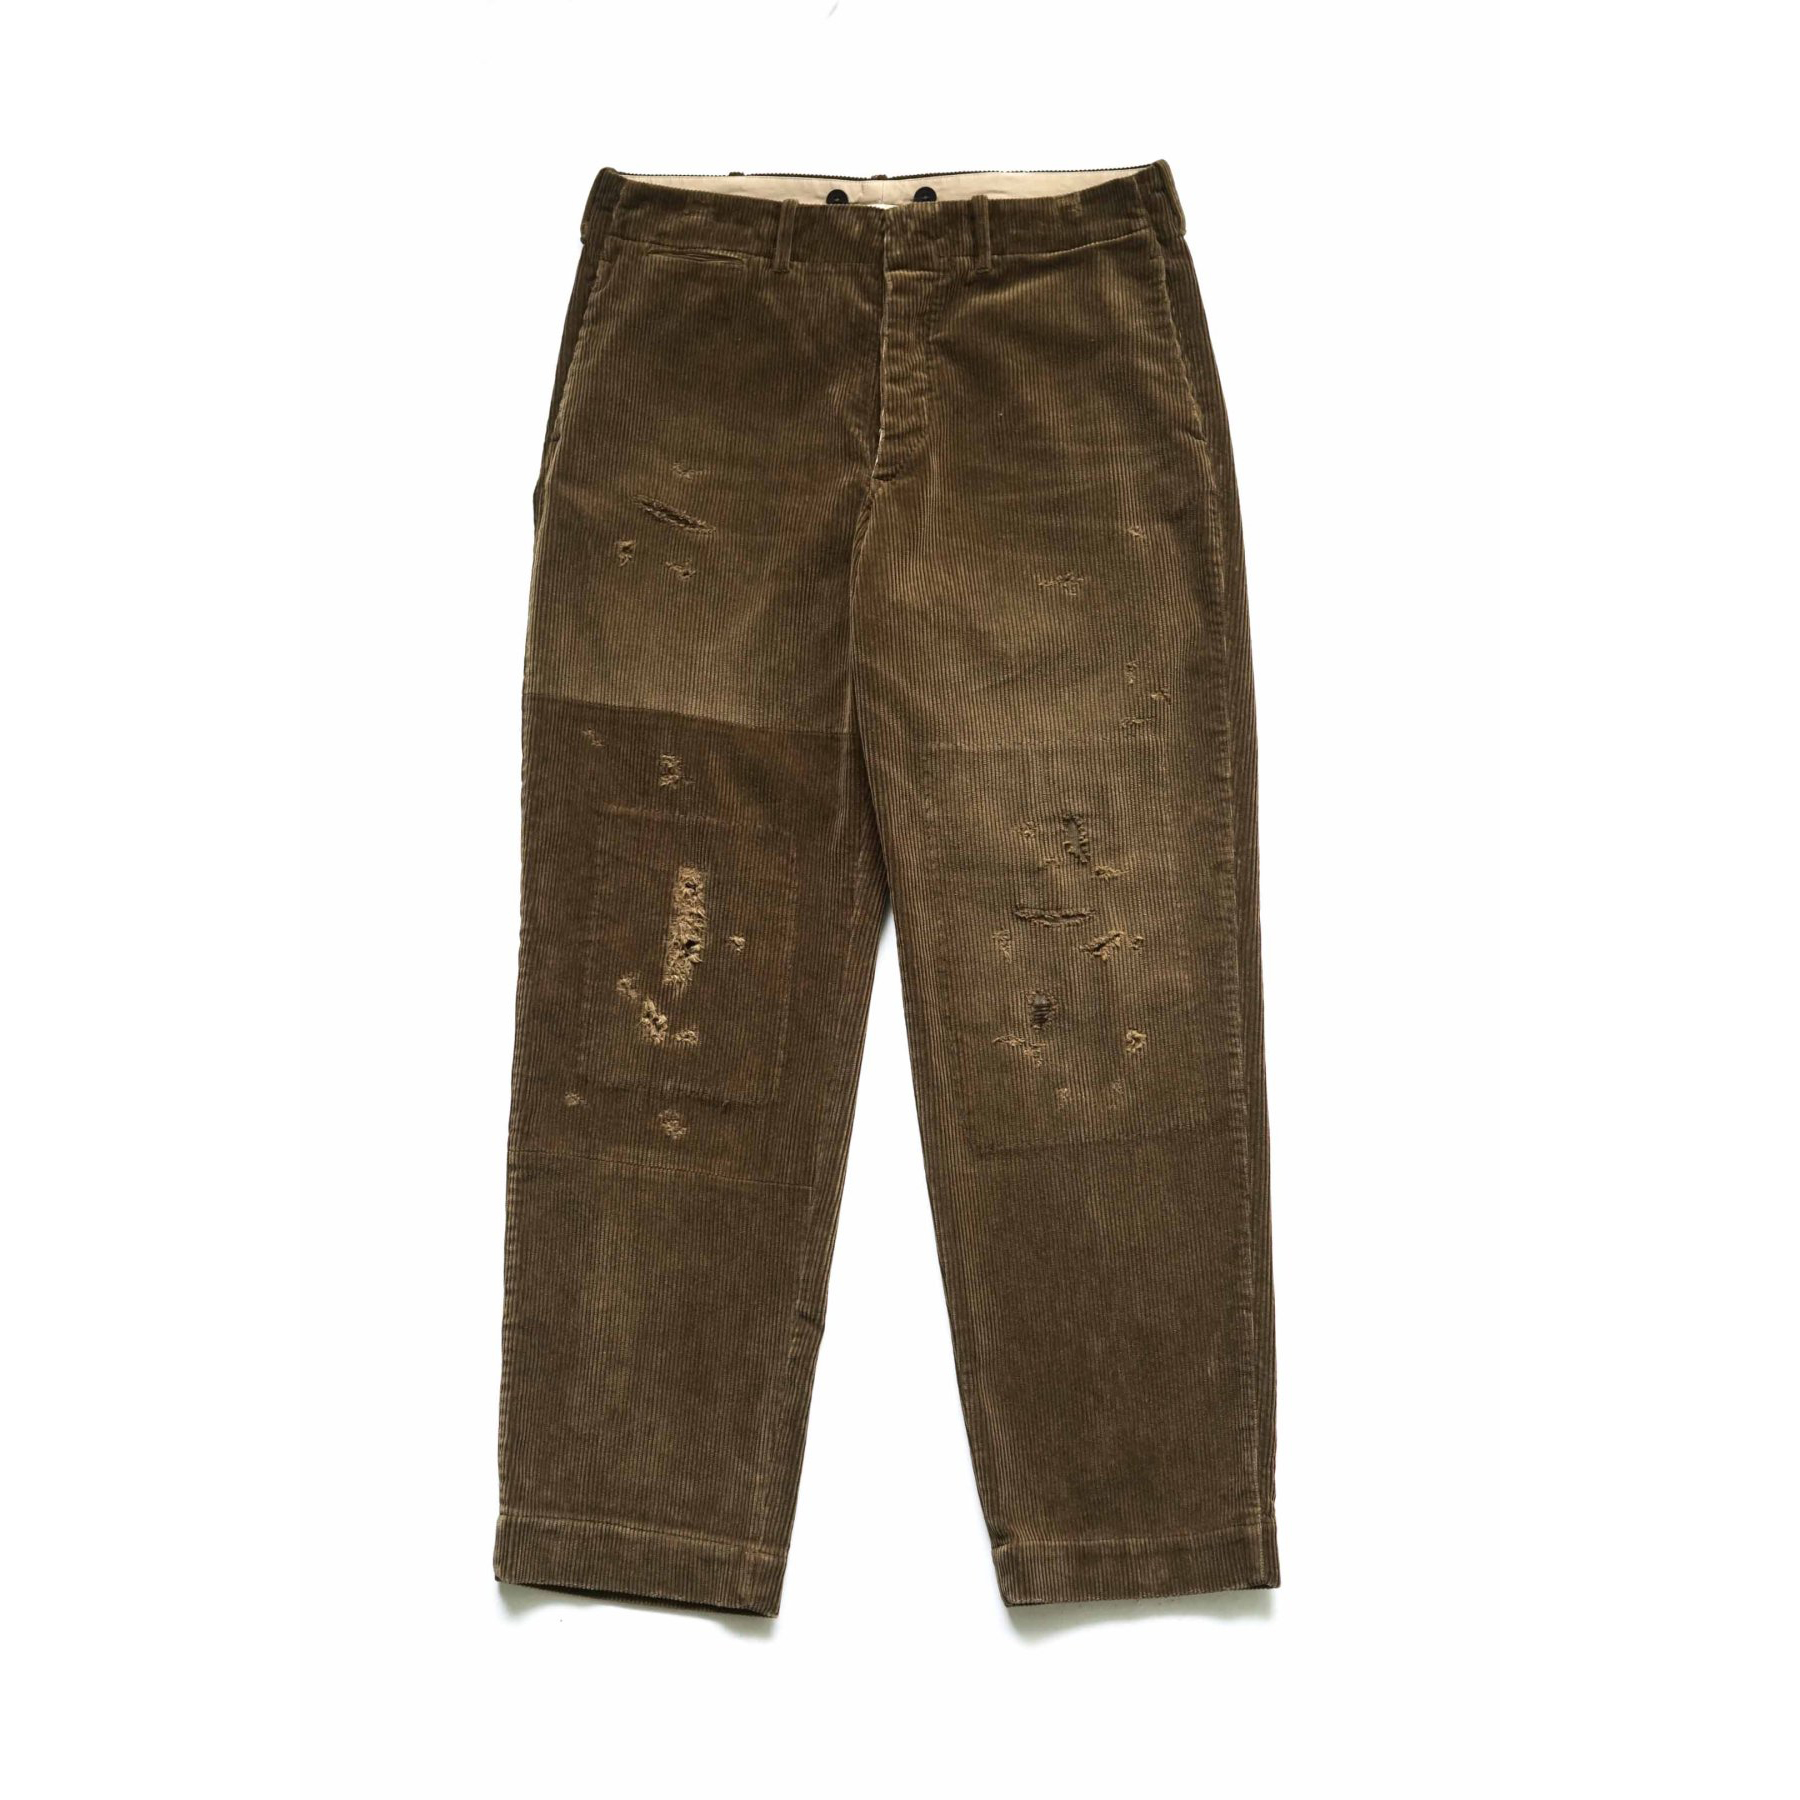 OLD JOE - PADED BACK ROVER TROUSER (SCAR FACE) - MOSS：PSC